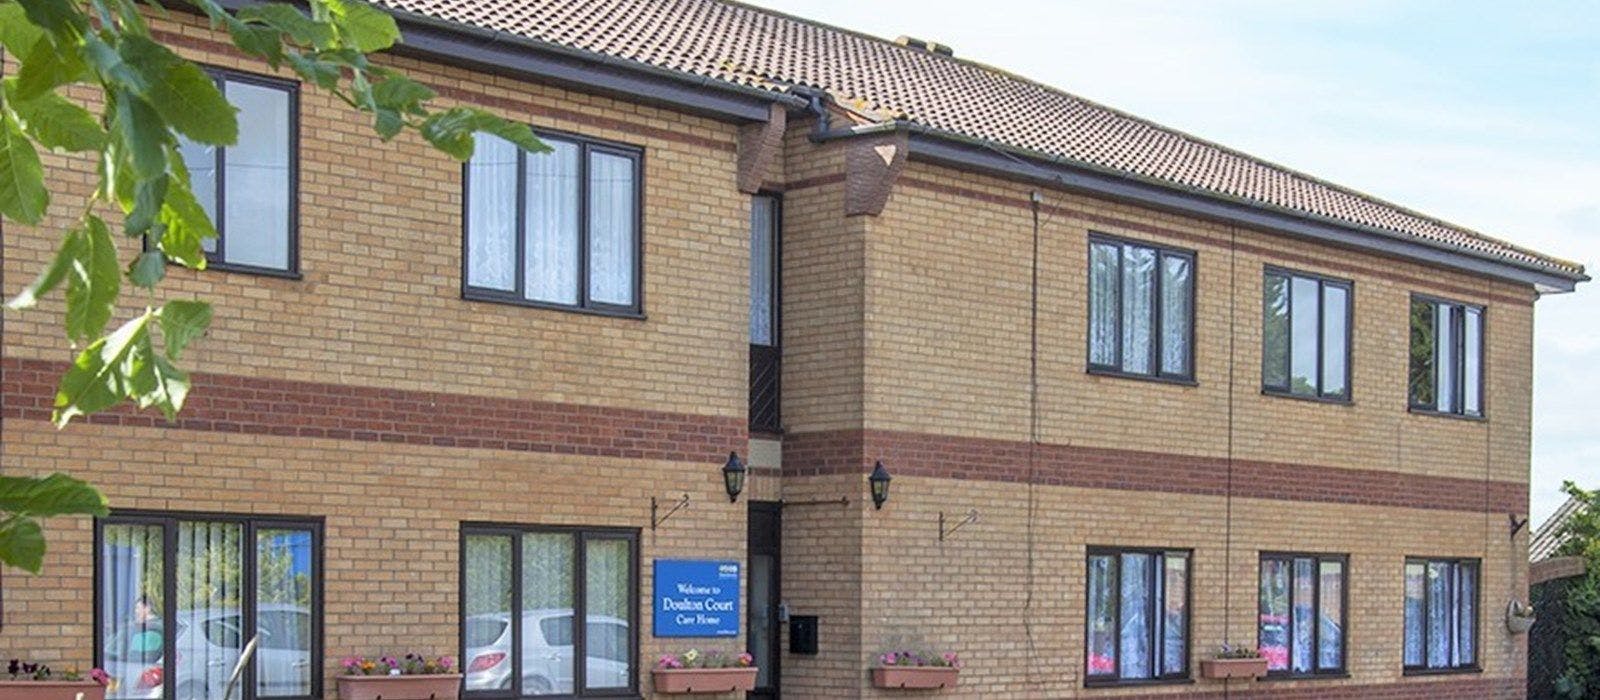 Extrior of Doulton Court Care Home in Mablethorpe, East Lindsey